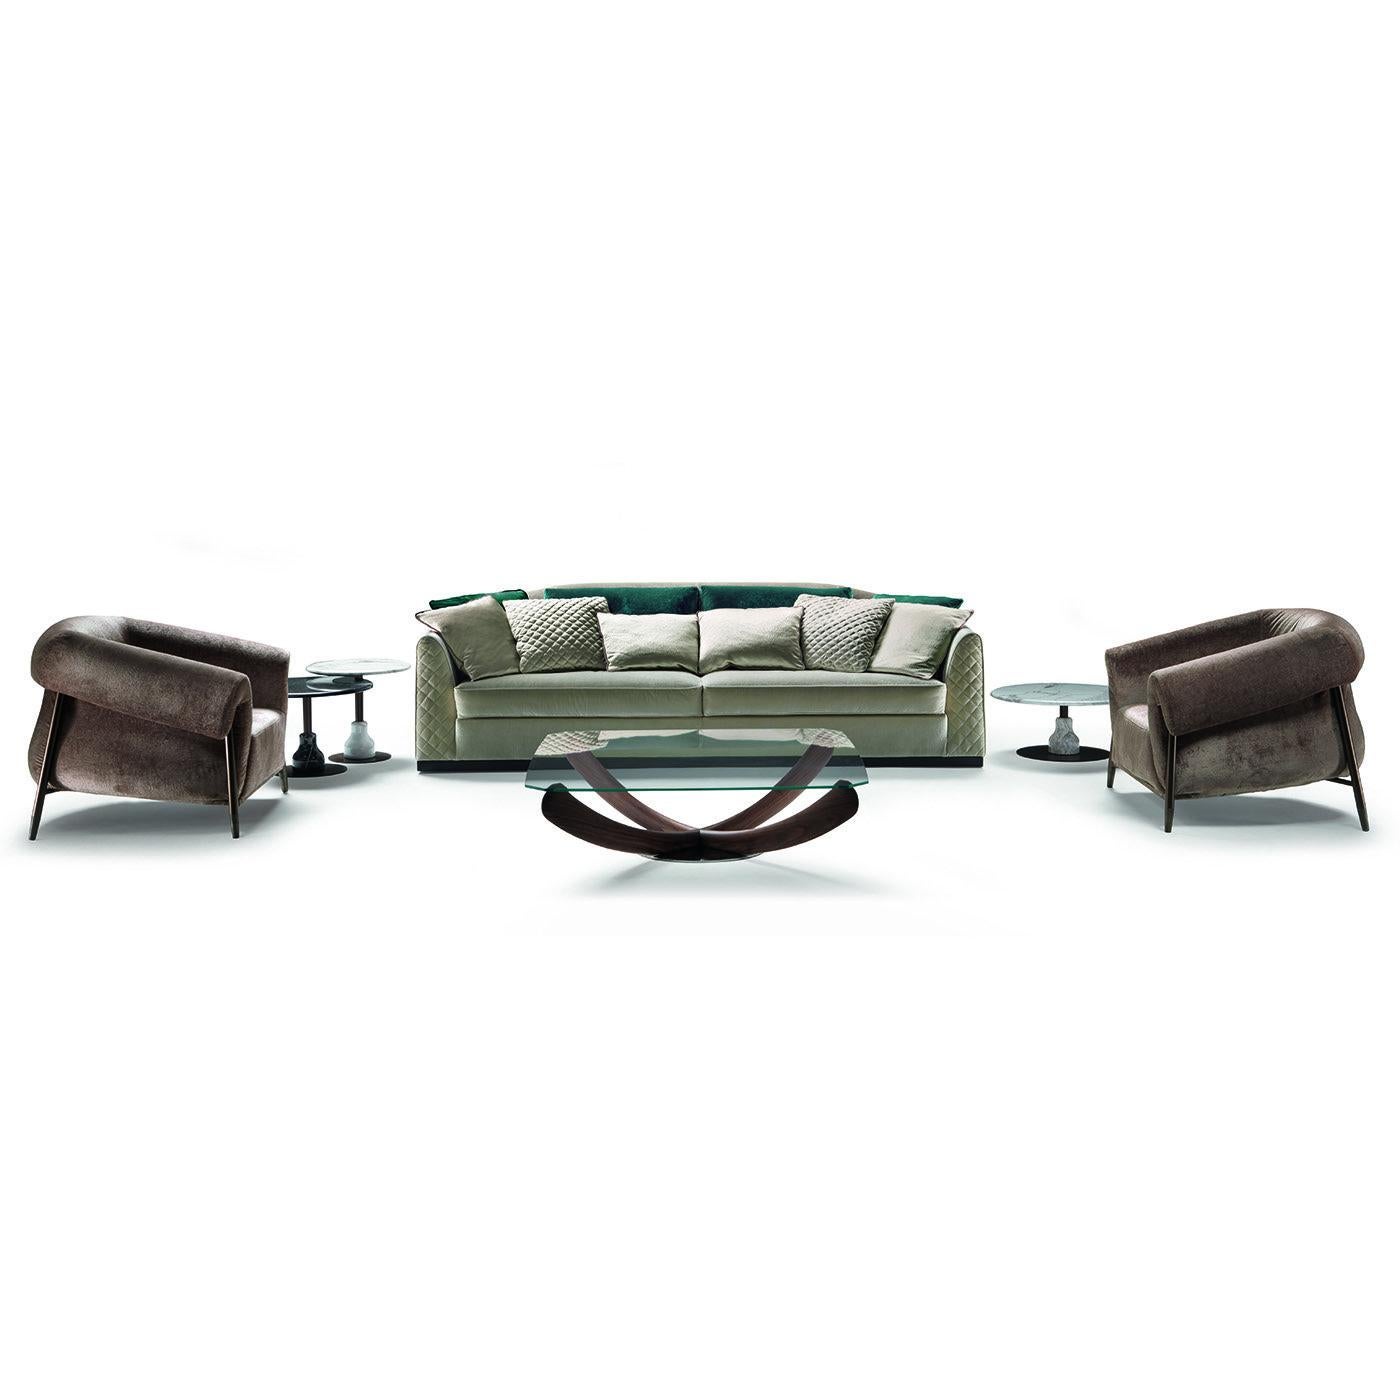 Elegant and contemporary, this sofa embodies Zanaboni's meticulous attention to detail, exquisite craftsmanship, and quality of materials. The geometric simplicity of the silhouette exudes classic sophistication while the exclusive details add a